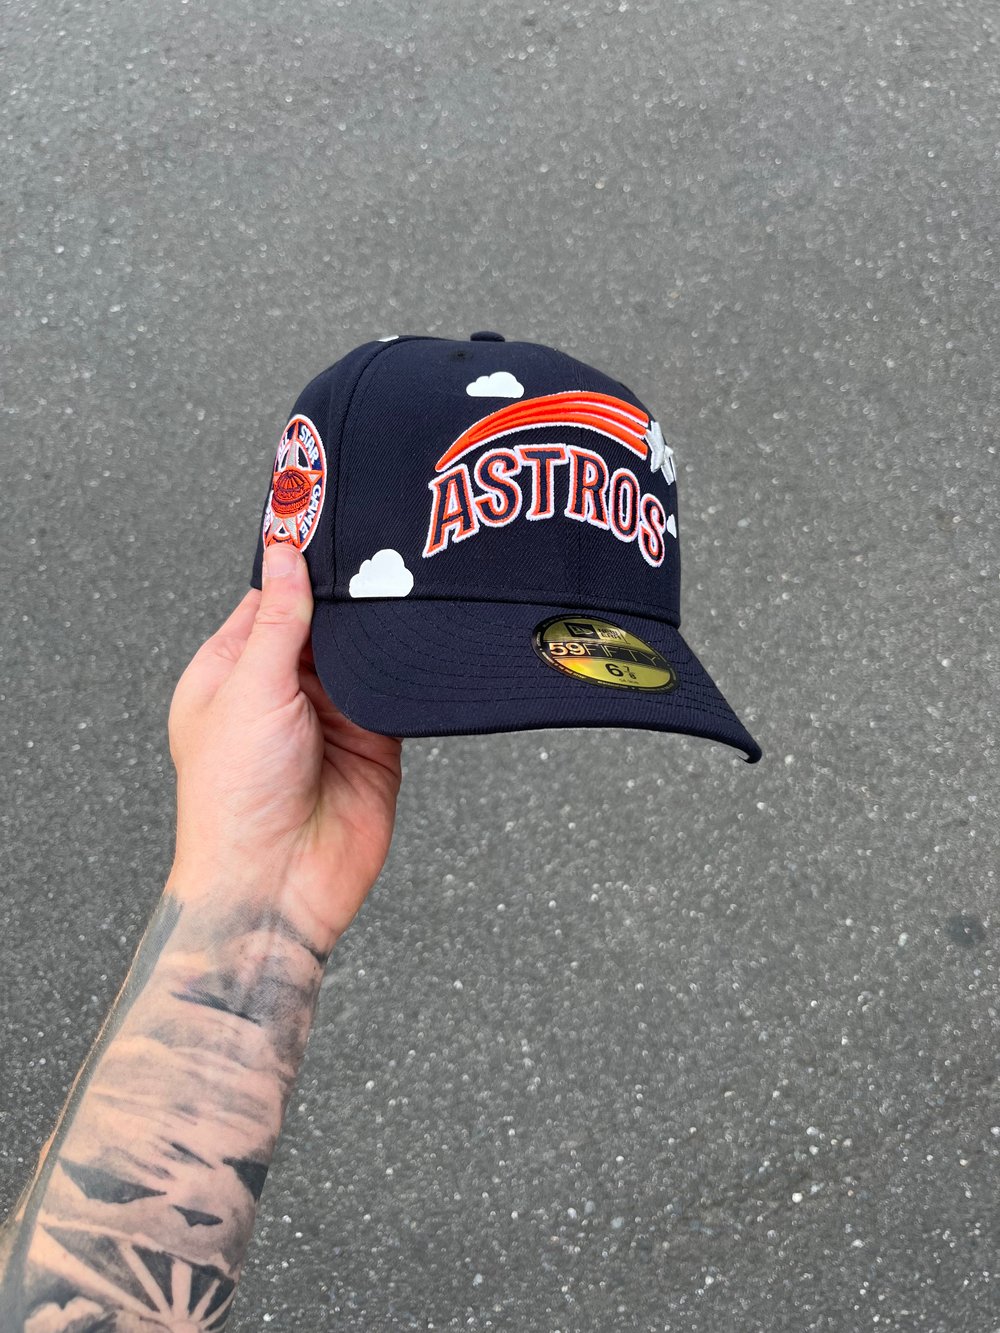 TRI TONE PARTLY CLOUDY NAVY HOUSTON ASTROS CUSTOM FITTED CAP